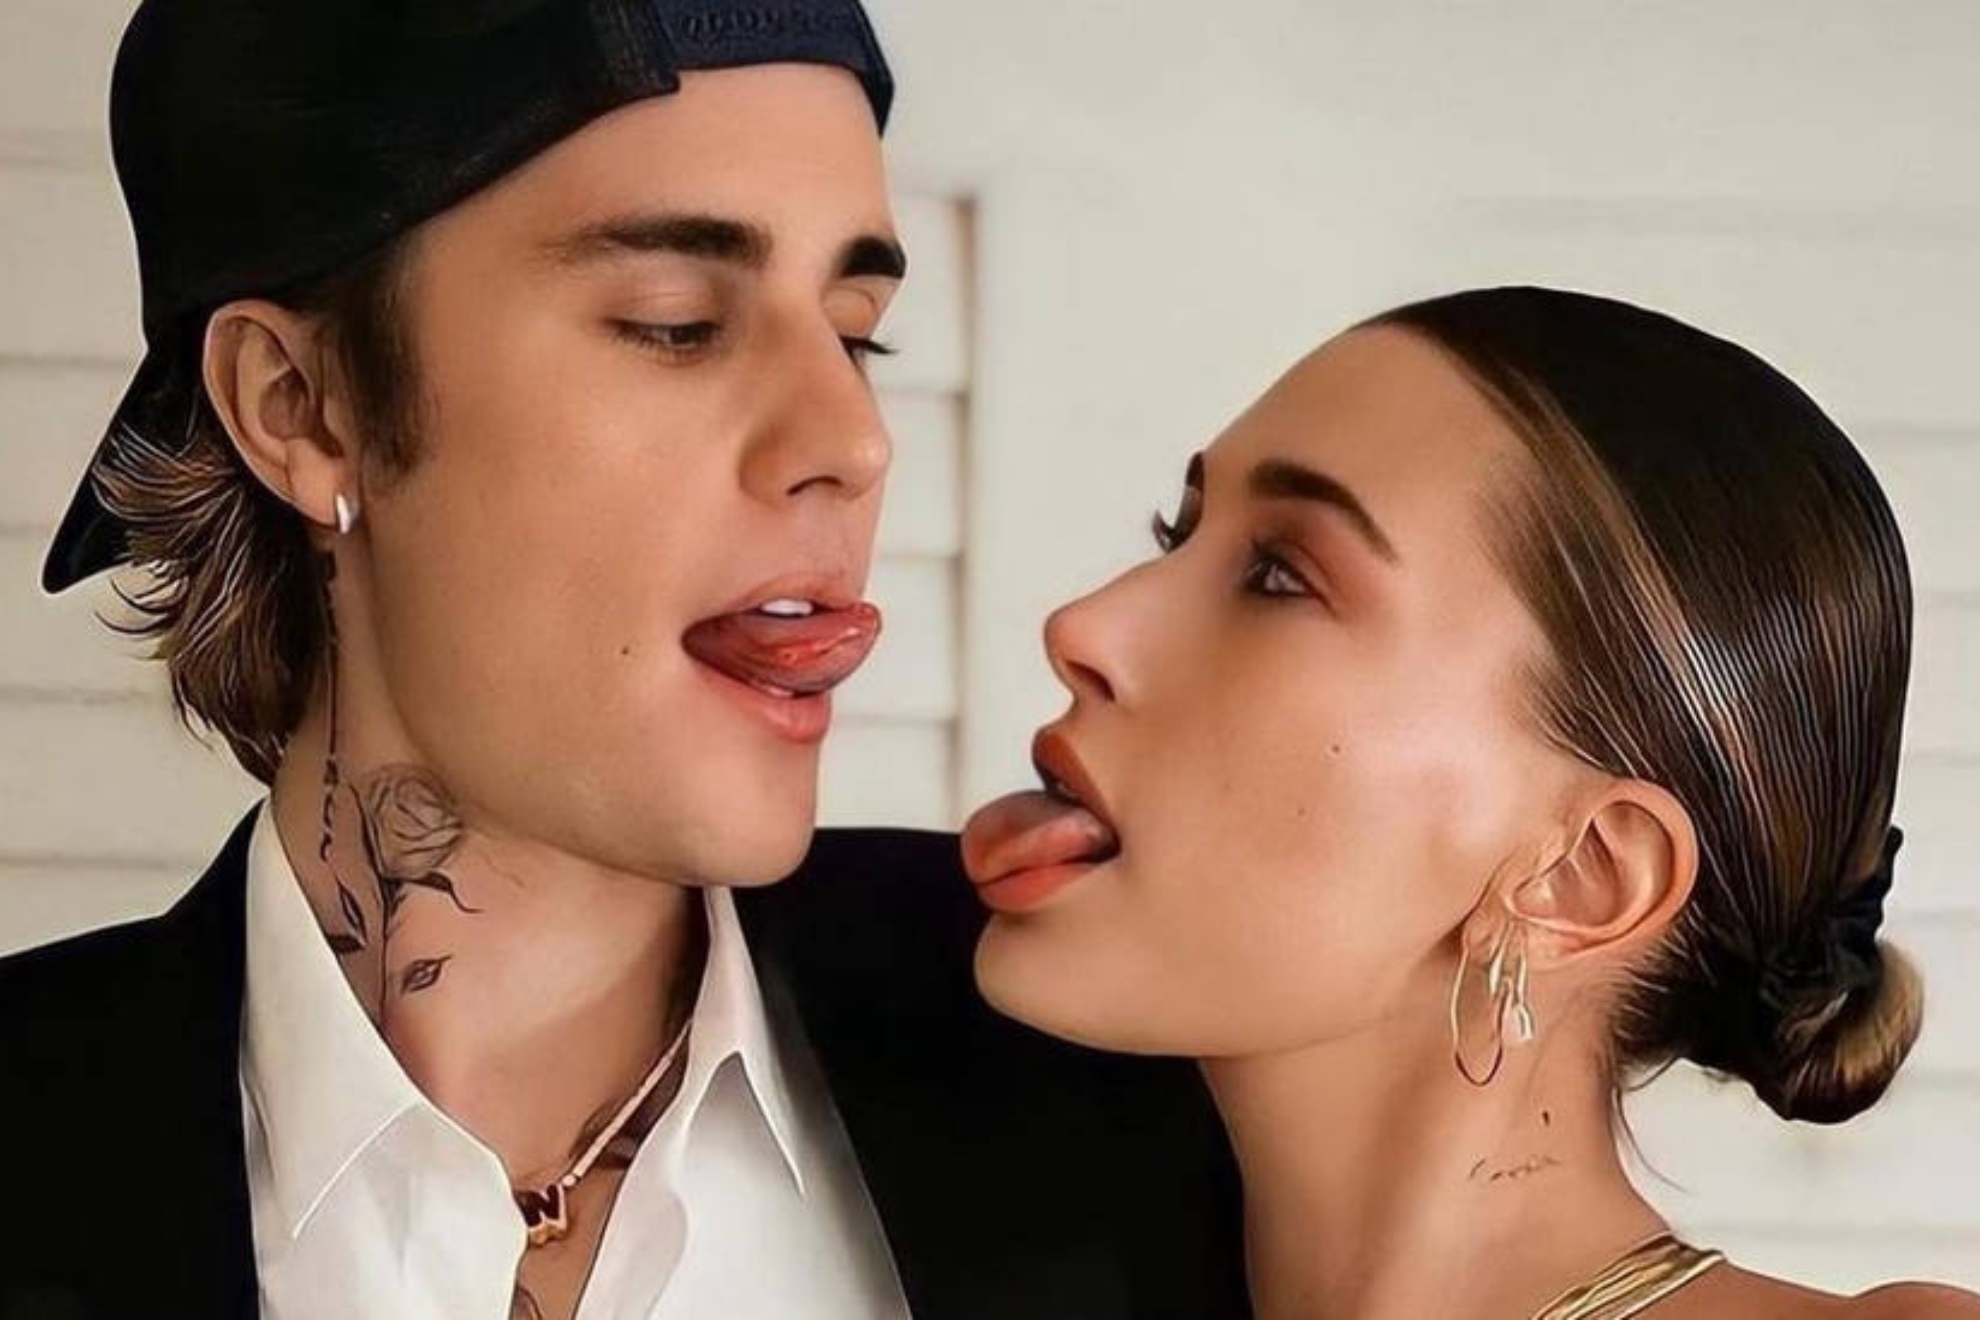 Justin Bieber gives his wife artwork valued at over 5,000 dollars... inspired by his text messages!